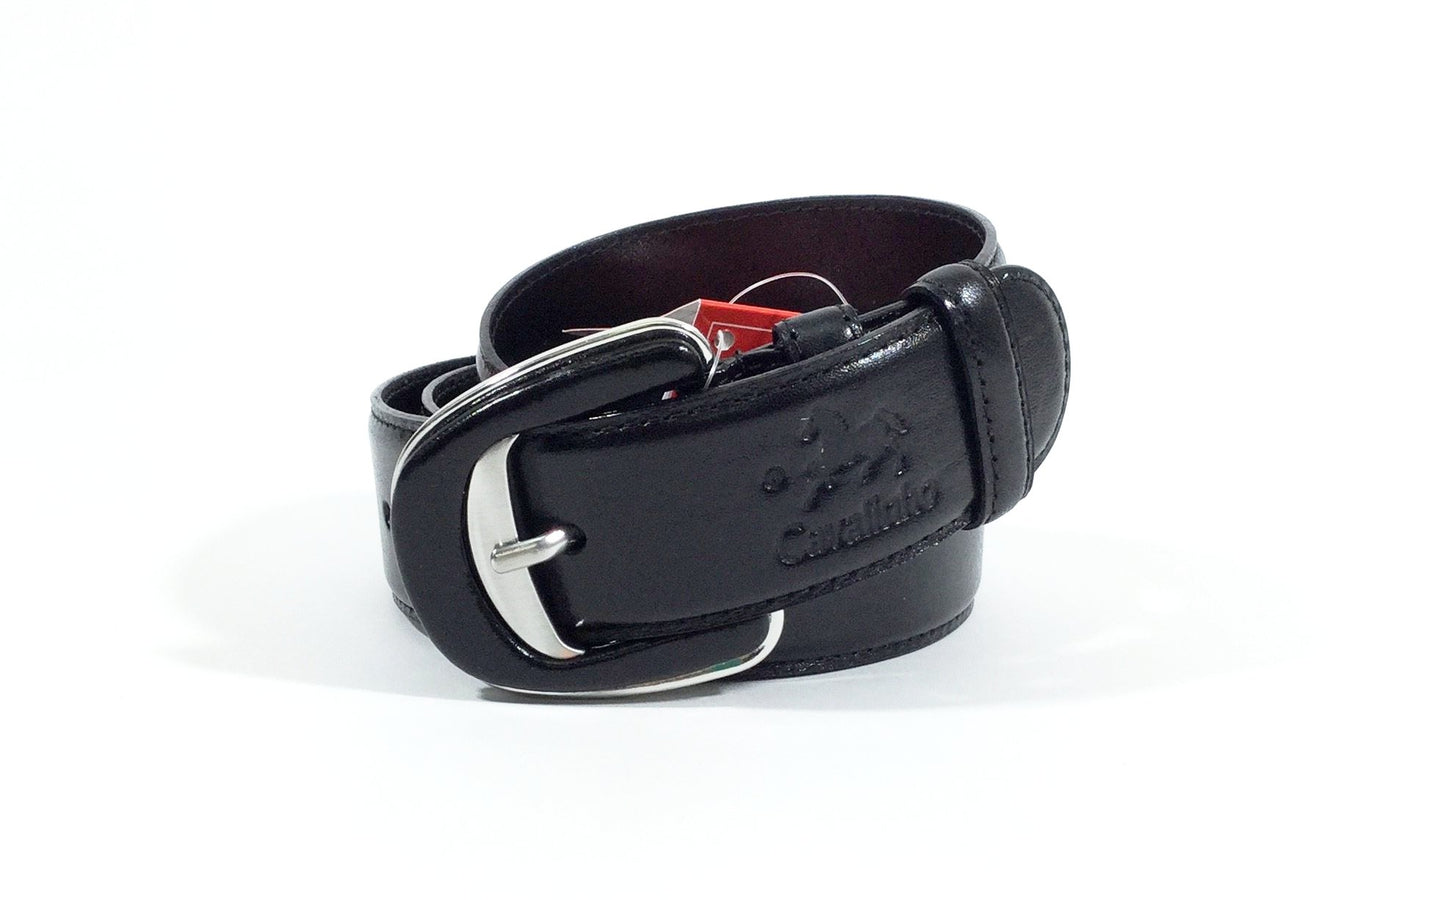 Cavalinho Classic Smooth Leather Belt - Black Silver - 58010906.01_Silver